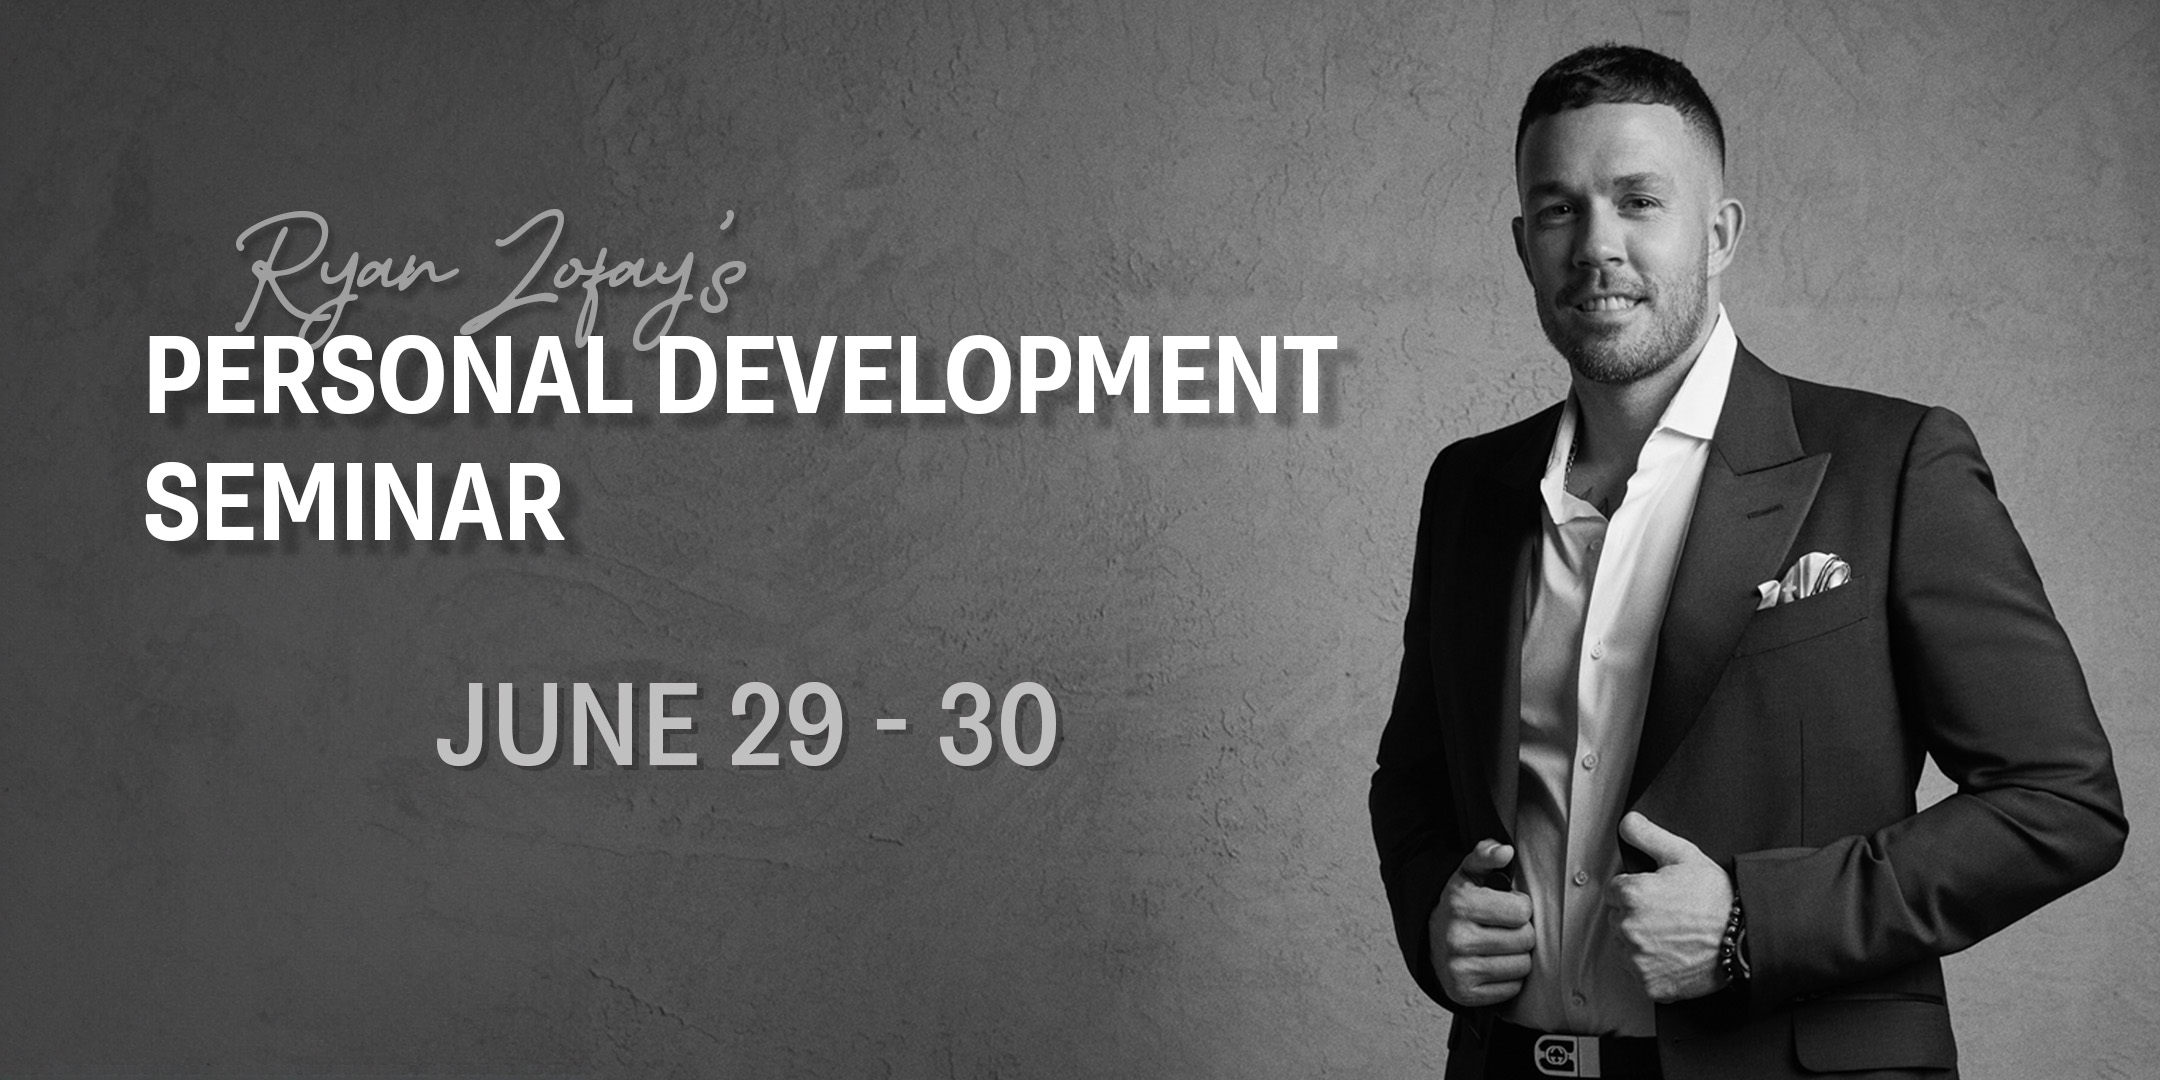 The Ryan Zofay events for personal development strategies include goal setting. Get your Ryan Zofay coaching event tickets today.